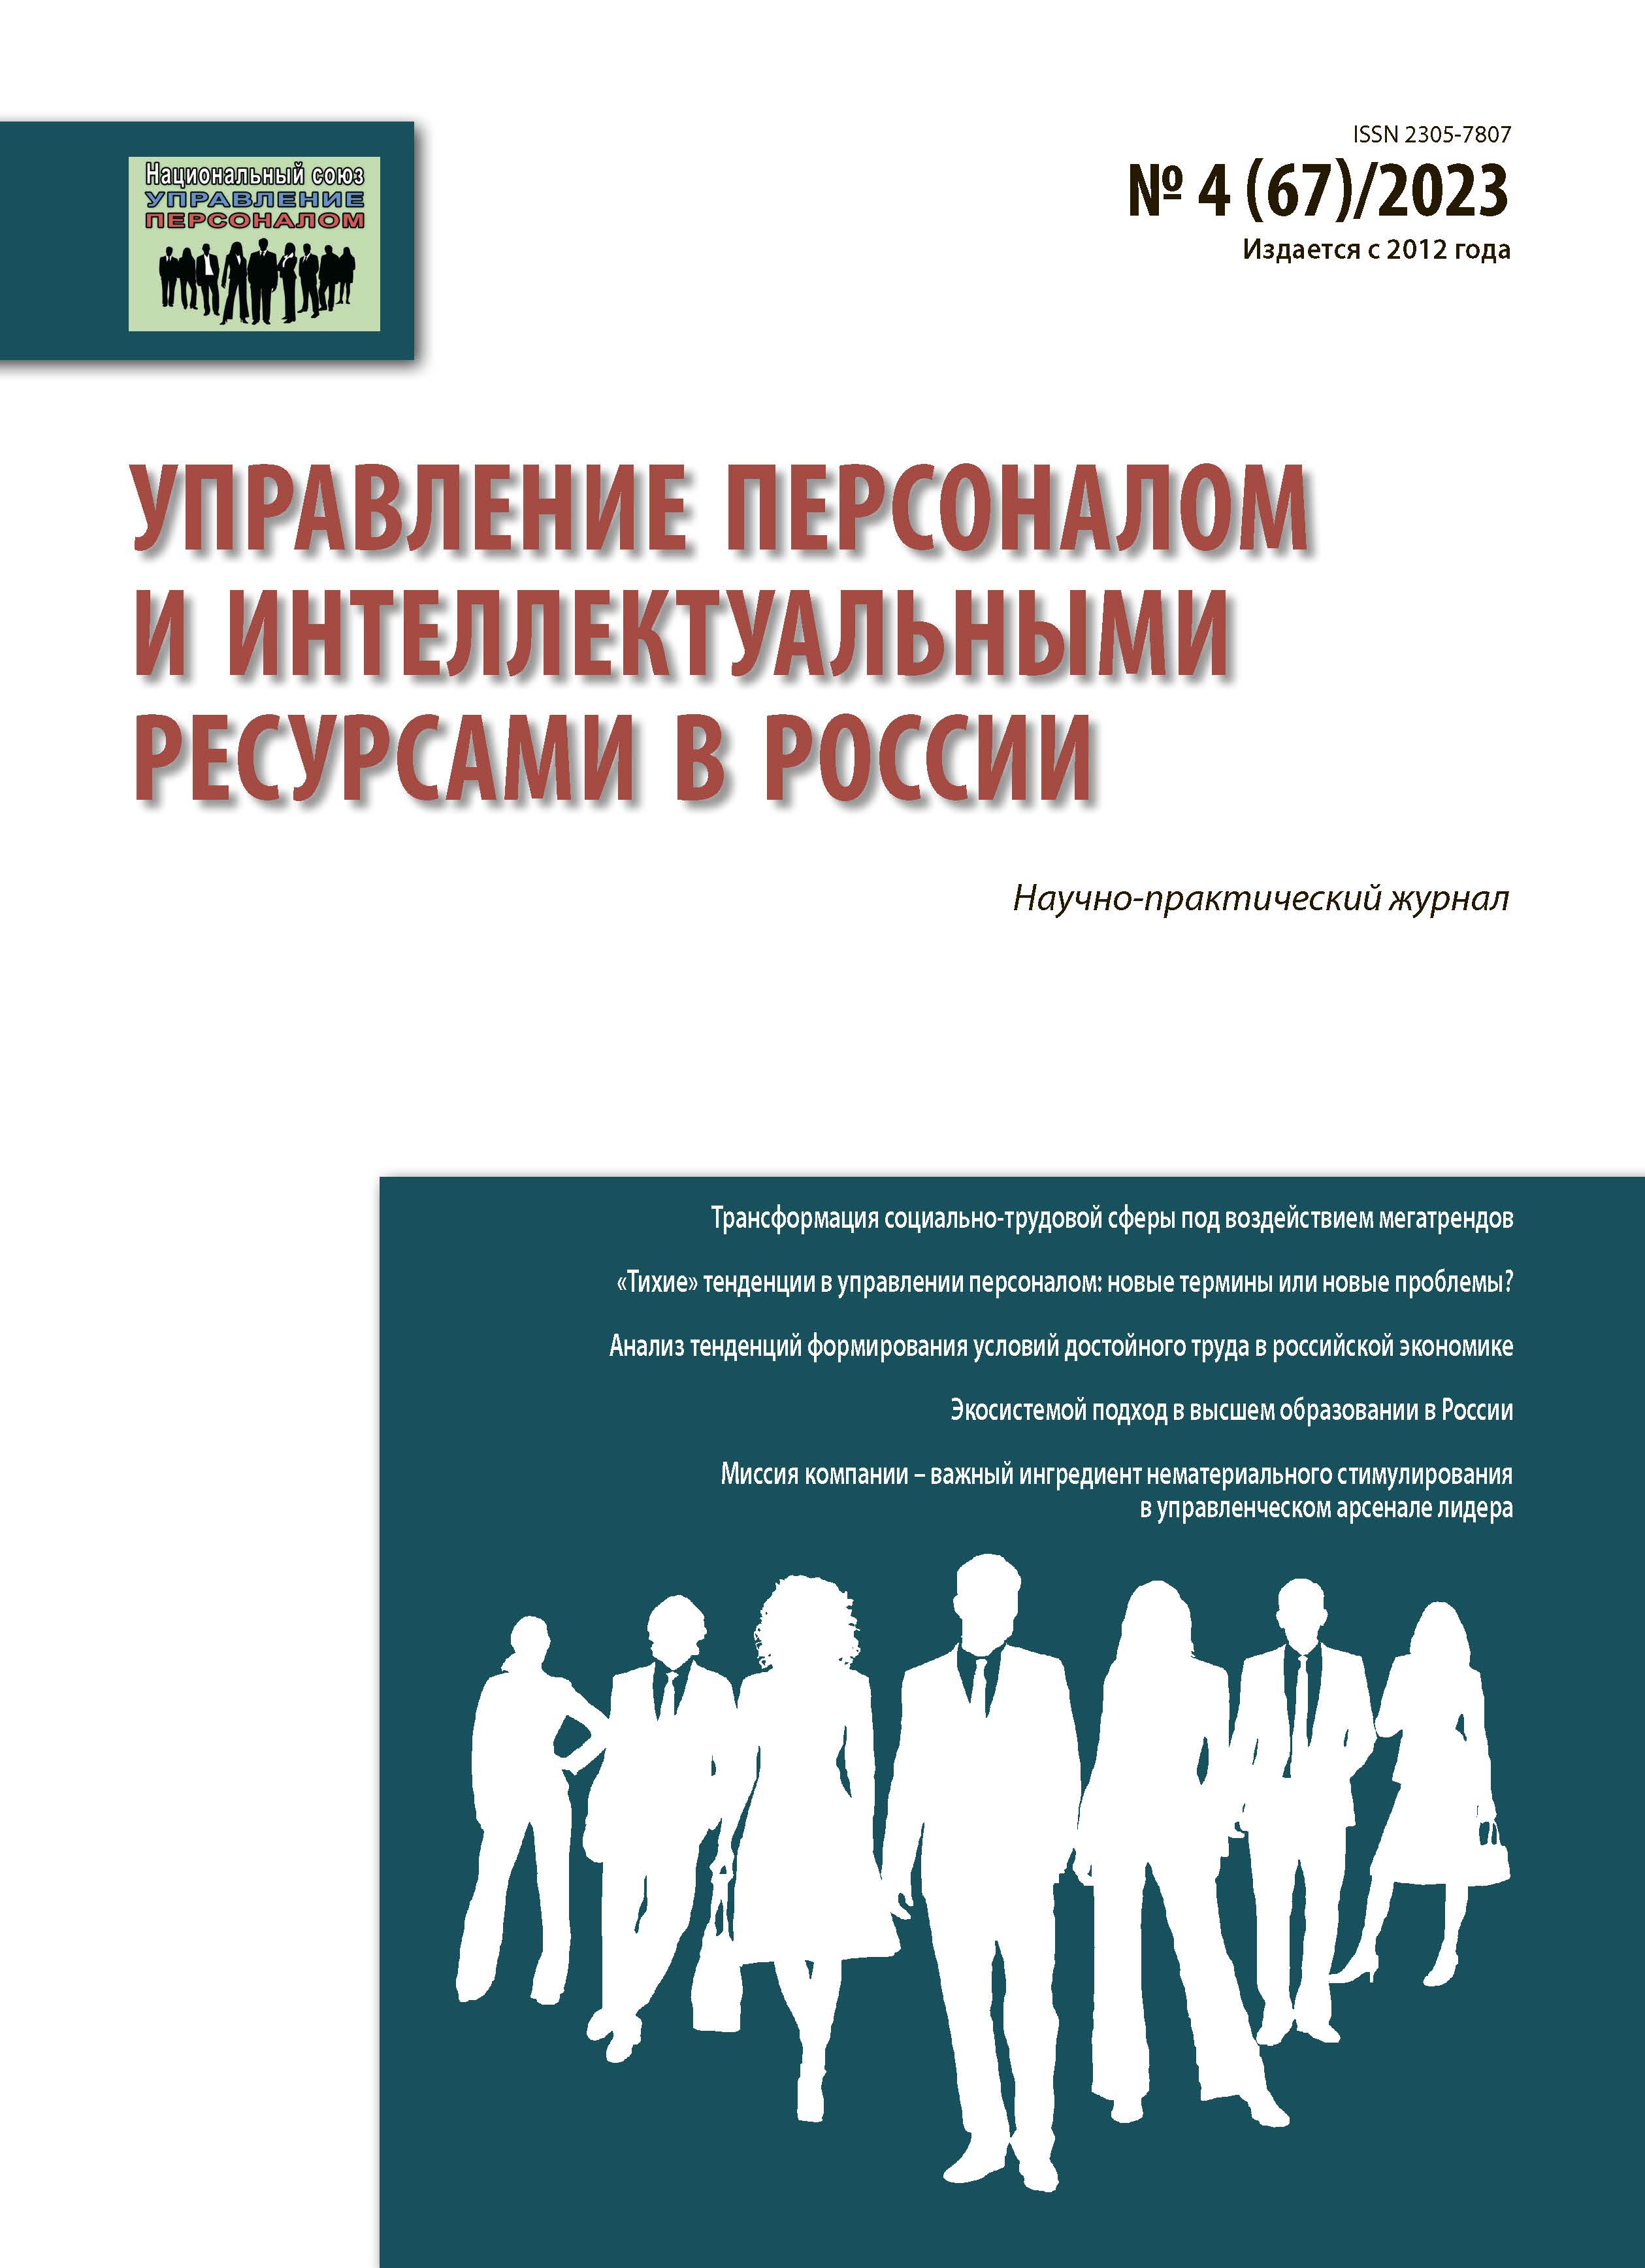                         ANALYSIS OF TRENDS IN THE FORMATION OF DECENT WORK CONDITIONS IN THE RUSSIAN ECONOMY
            